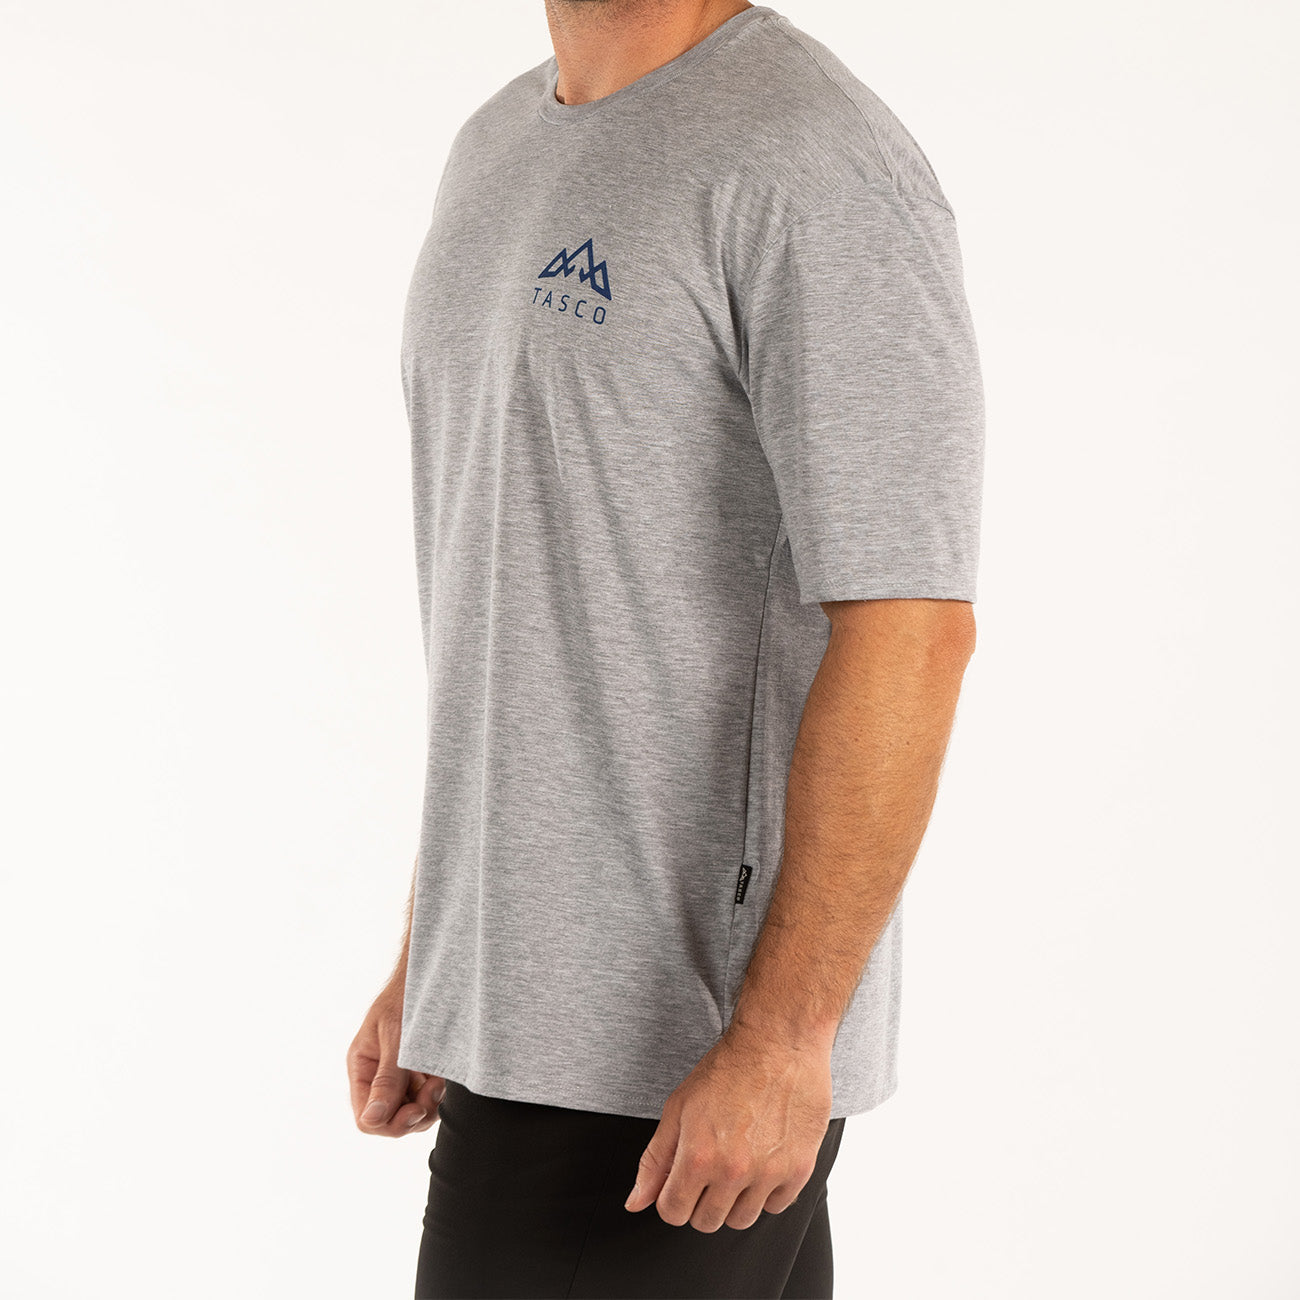 Sessions drirelease® Ride Jersey - Standard (Heather Gray)